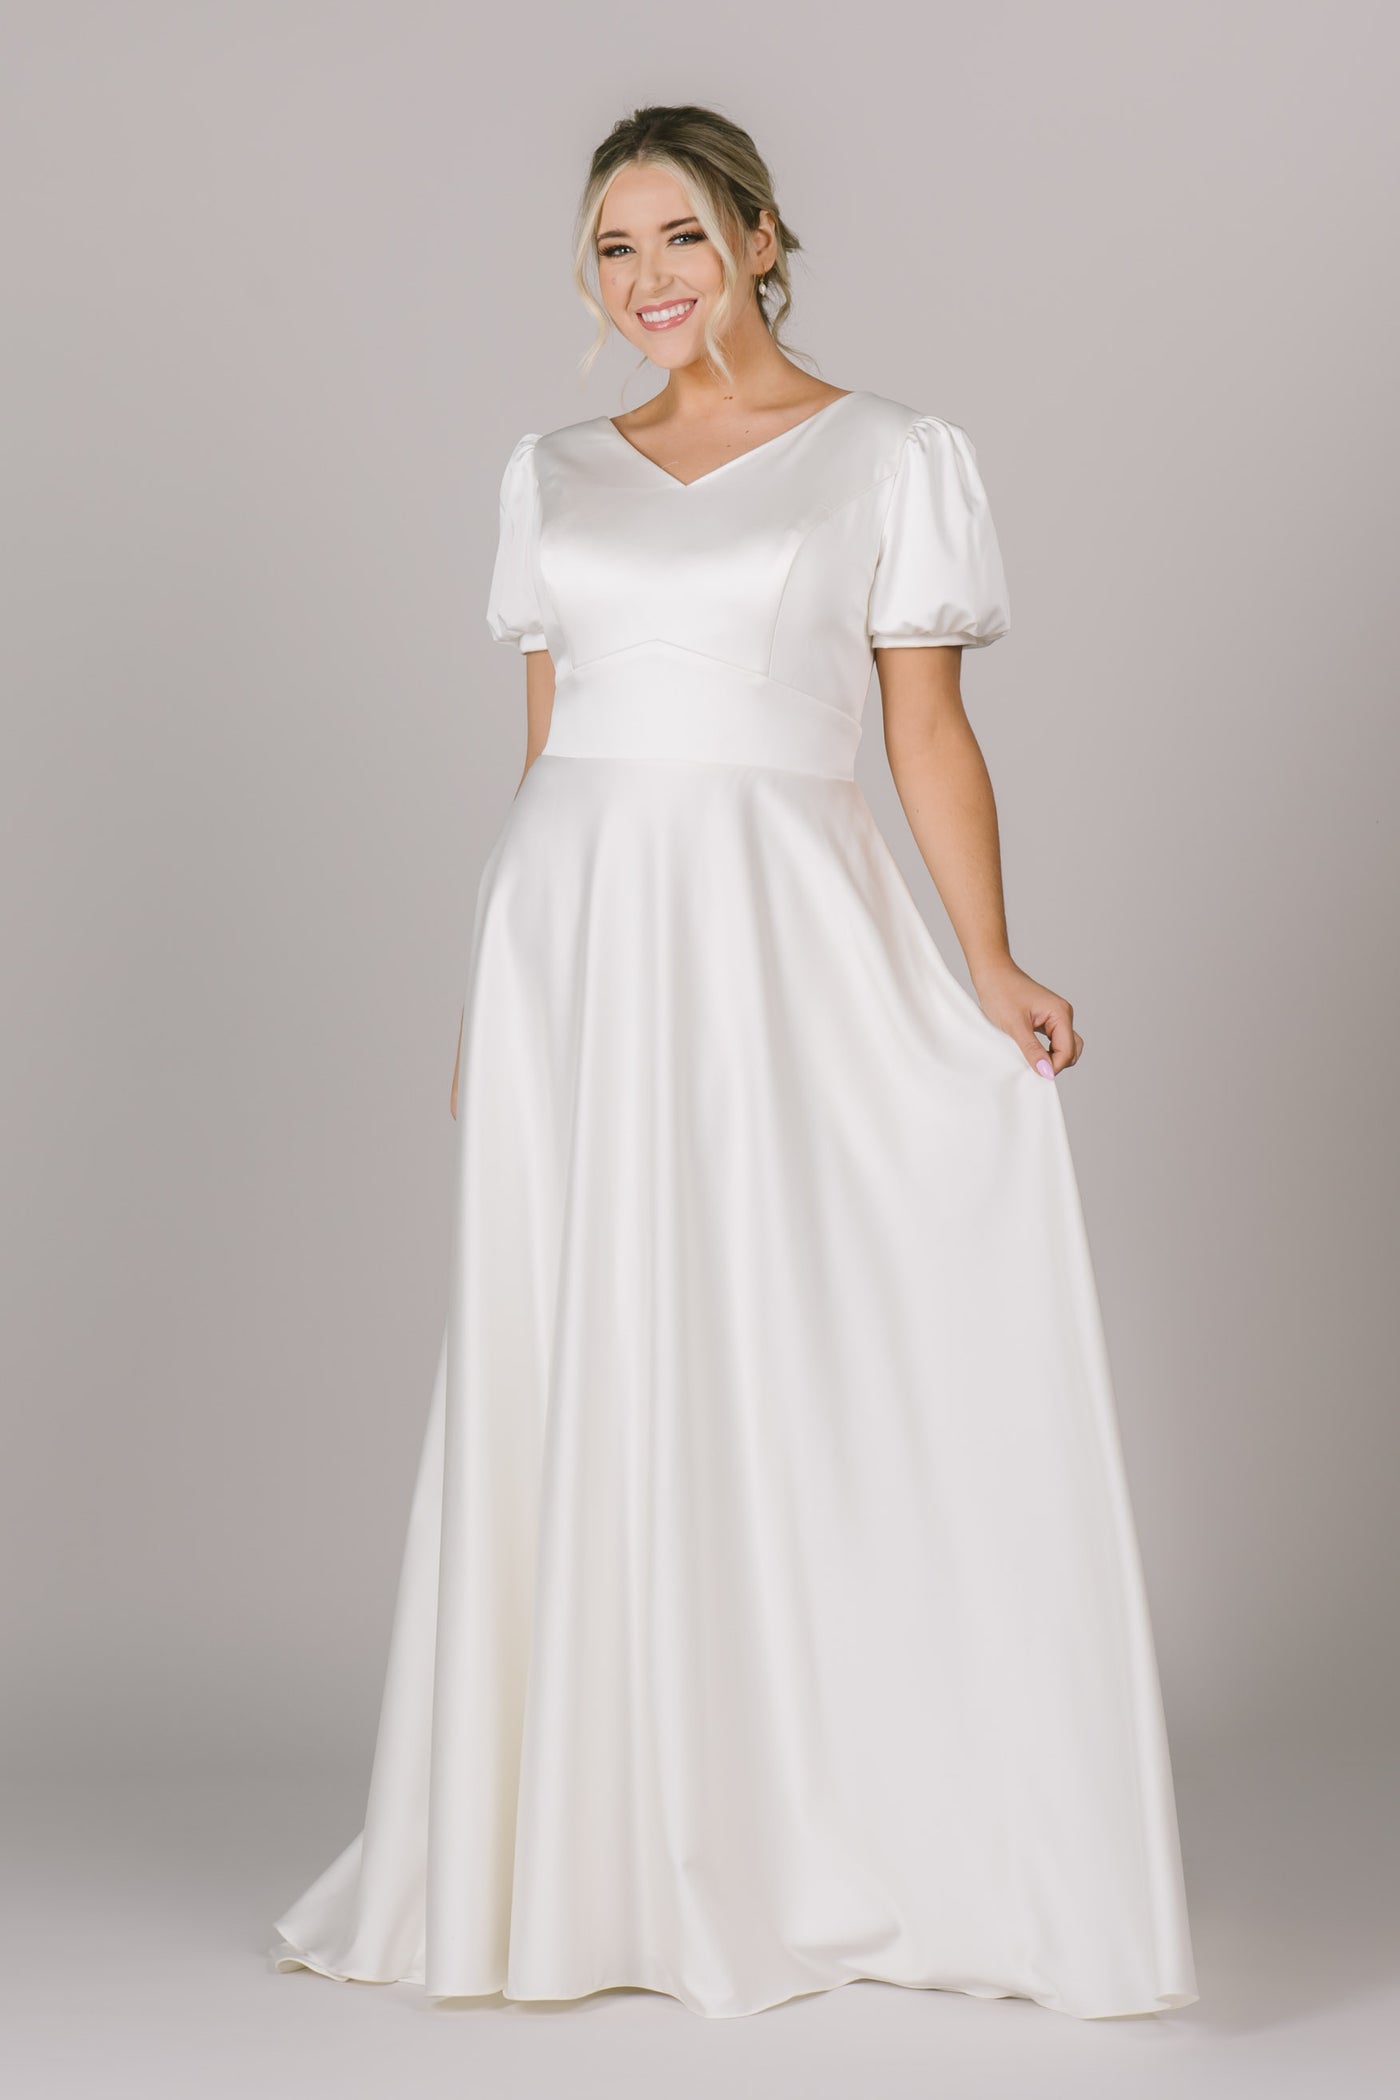 A modest wedding dress in Utah made out of the silkiest and softest material! It features a v-neckline, puff sleeves, and an a-line silhouette, which compliments each body type flawlessly!